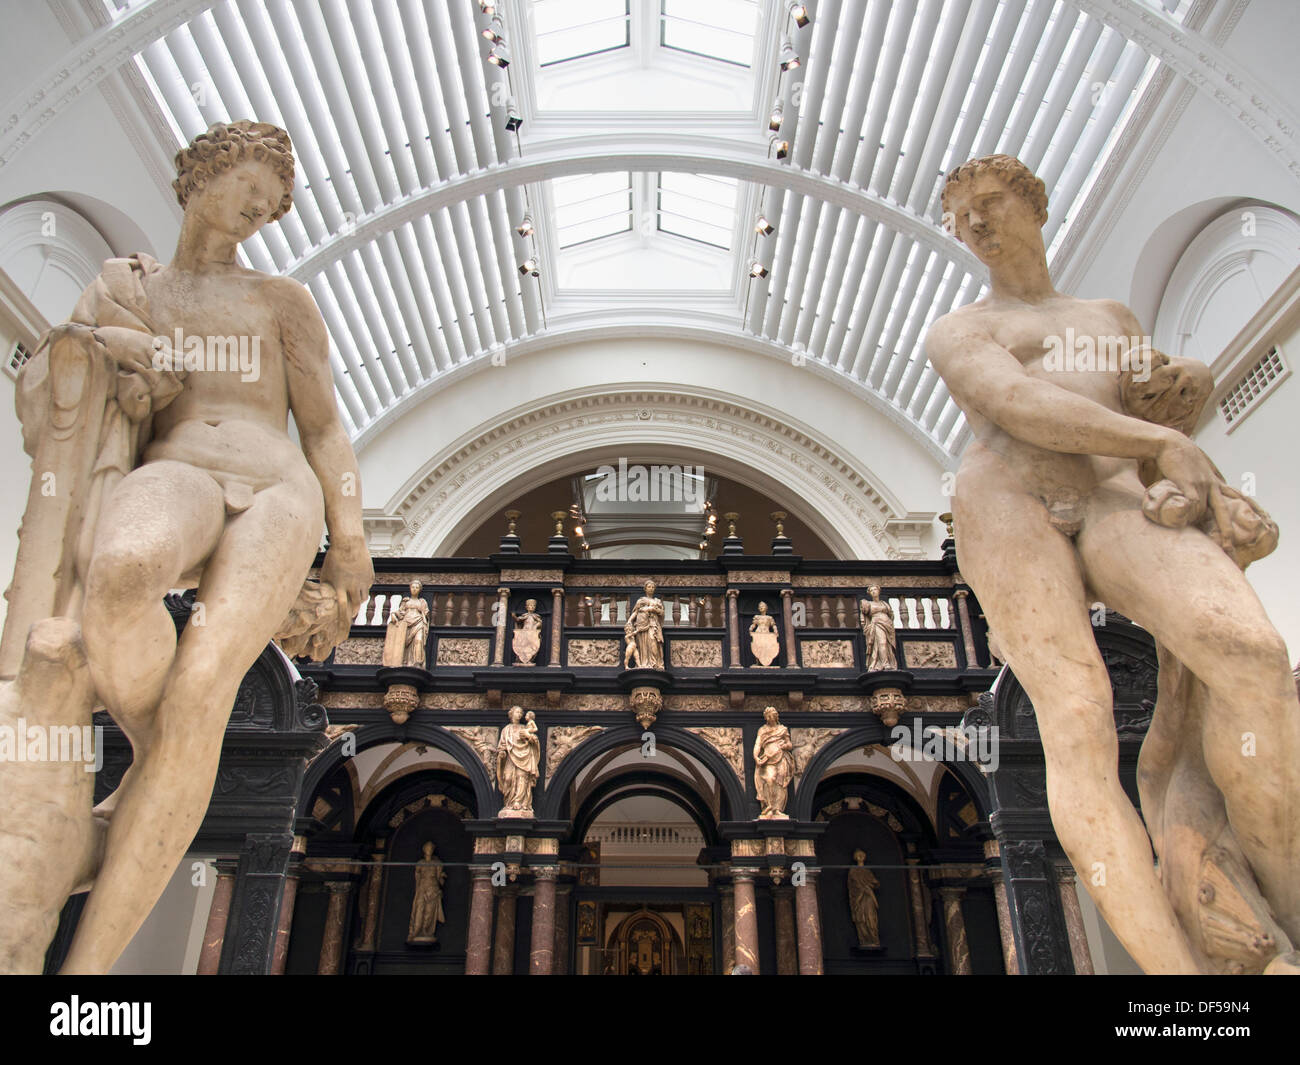 The Victoria and Albert Museum, London - statues of Zephyr and Apollo by Pietro Francavilla 1 Stock Photo